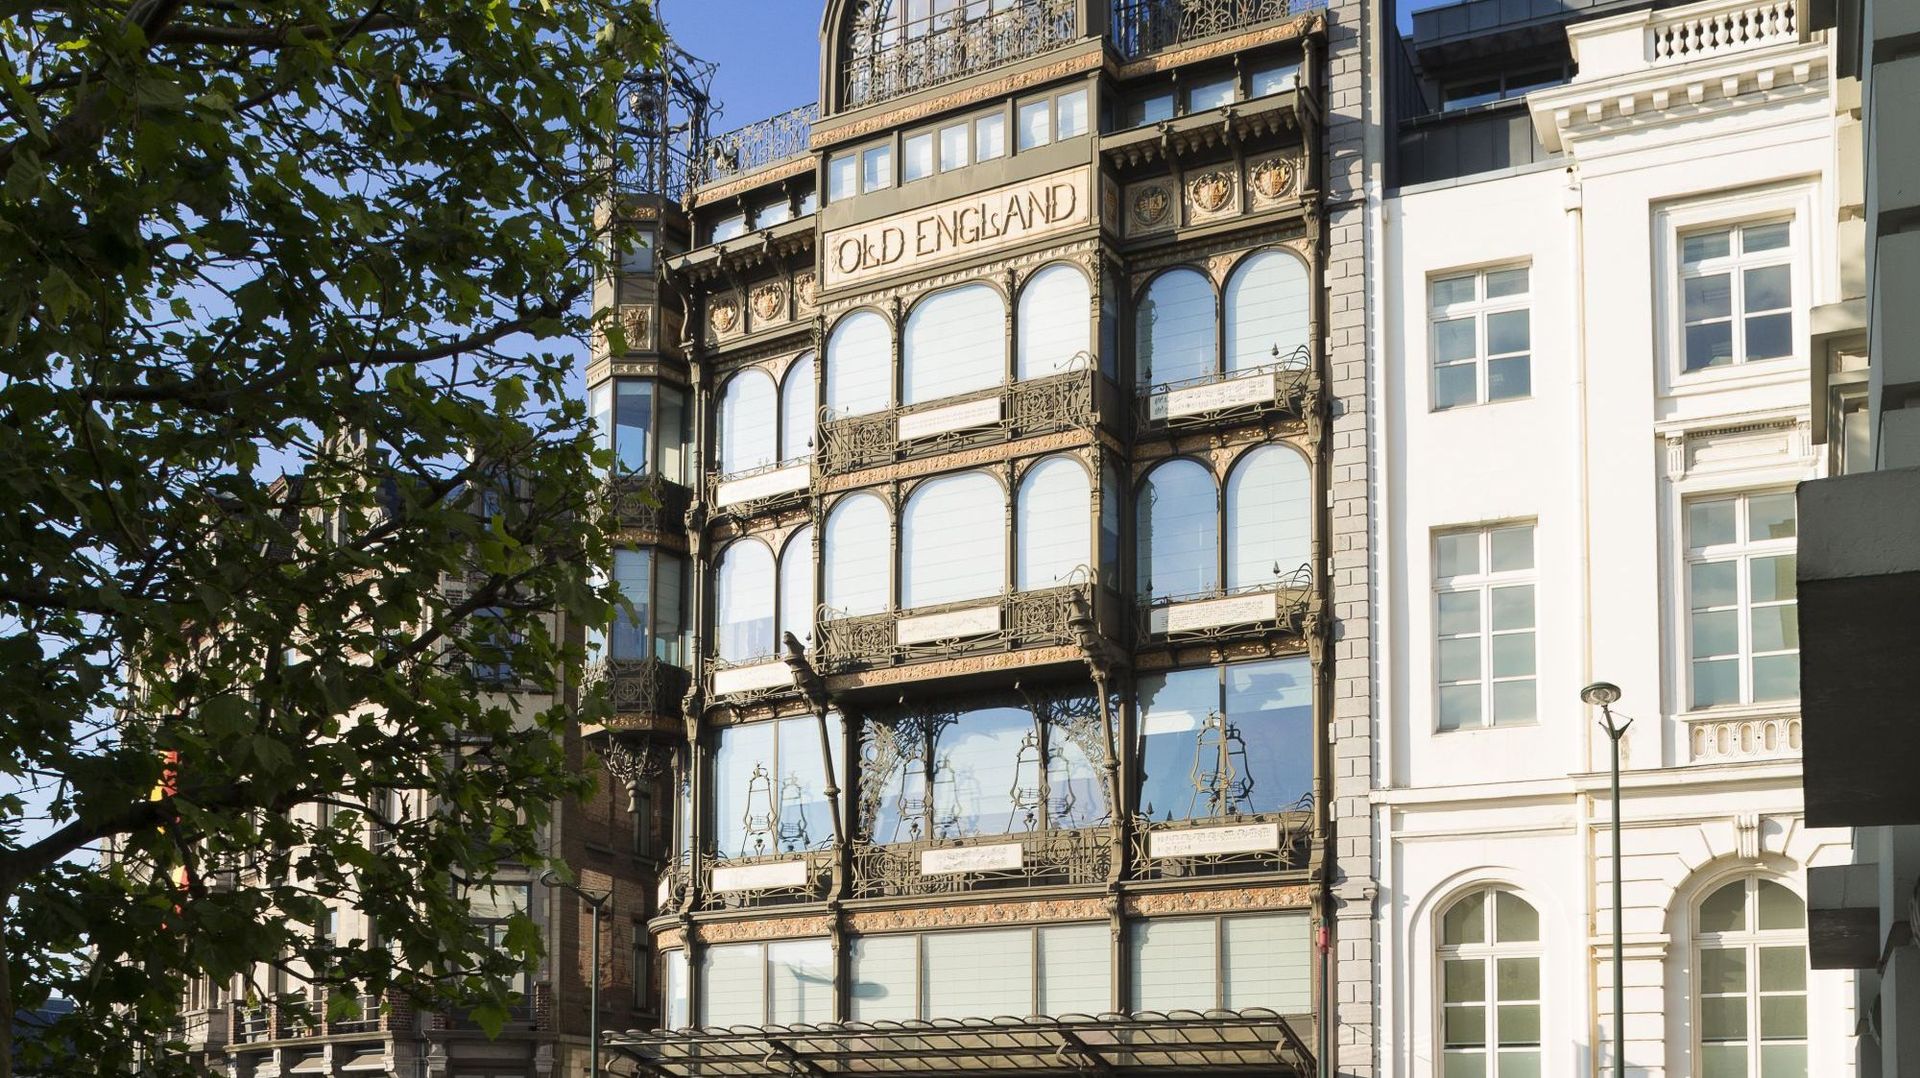 The "Old England" shop in Brussels. Designed by Paul Saintenoy in 1899, it is now the Musical Instrument Museum.